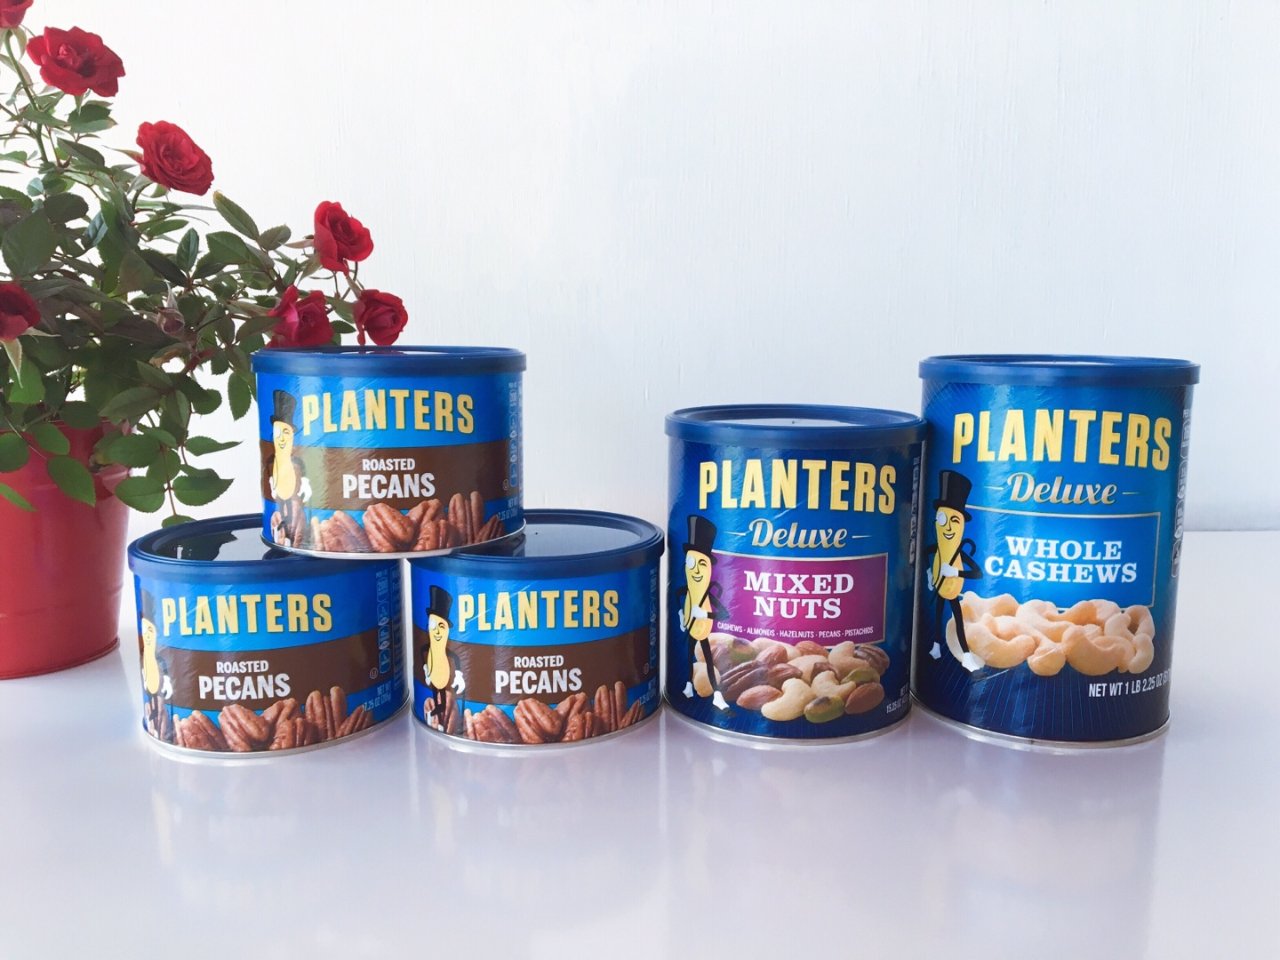 Planters 绅士,山核桃,Deluxe Mixed Nuts,Deluxe Whole Cashews,混合坚果,腰果,Trader Joe's 缺德舅,玫瑰花